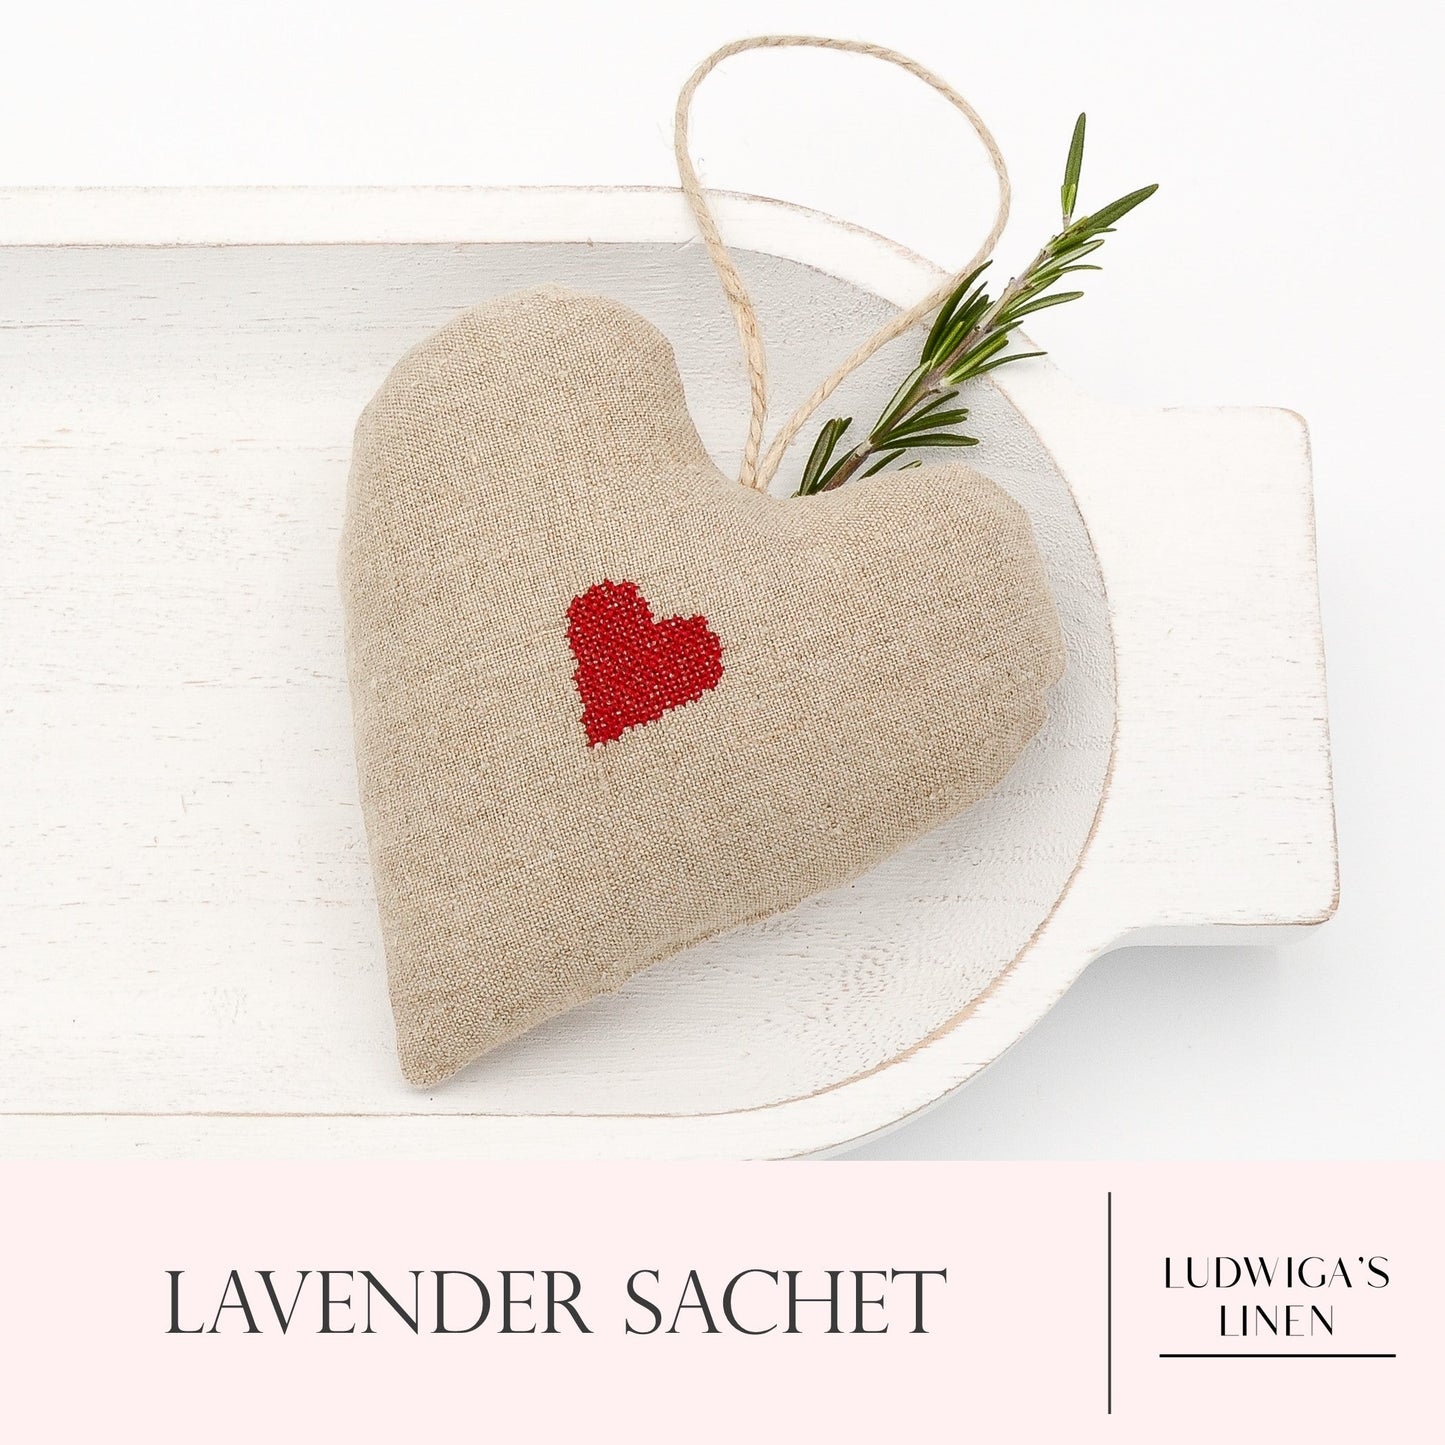 Vintage German mangle cloth linen lavender sachet heart with red embroidered heart, hemp twine tie and filled with high quality lavender from Provence France